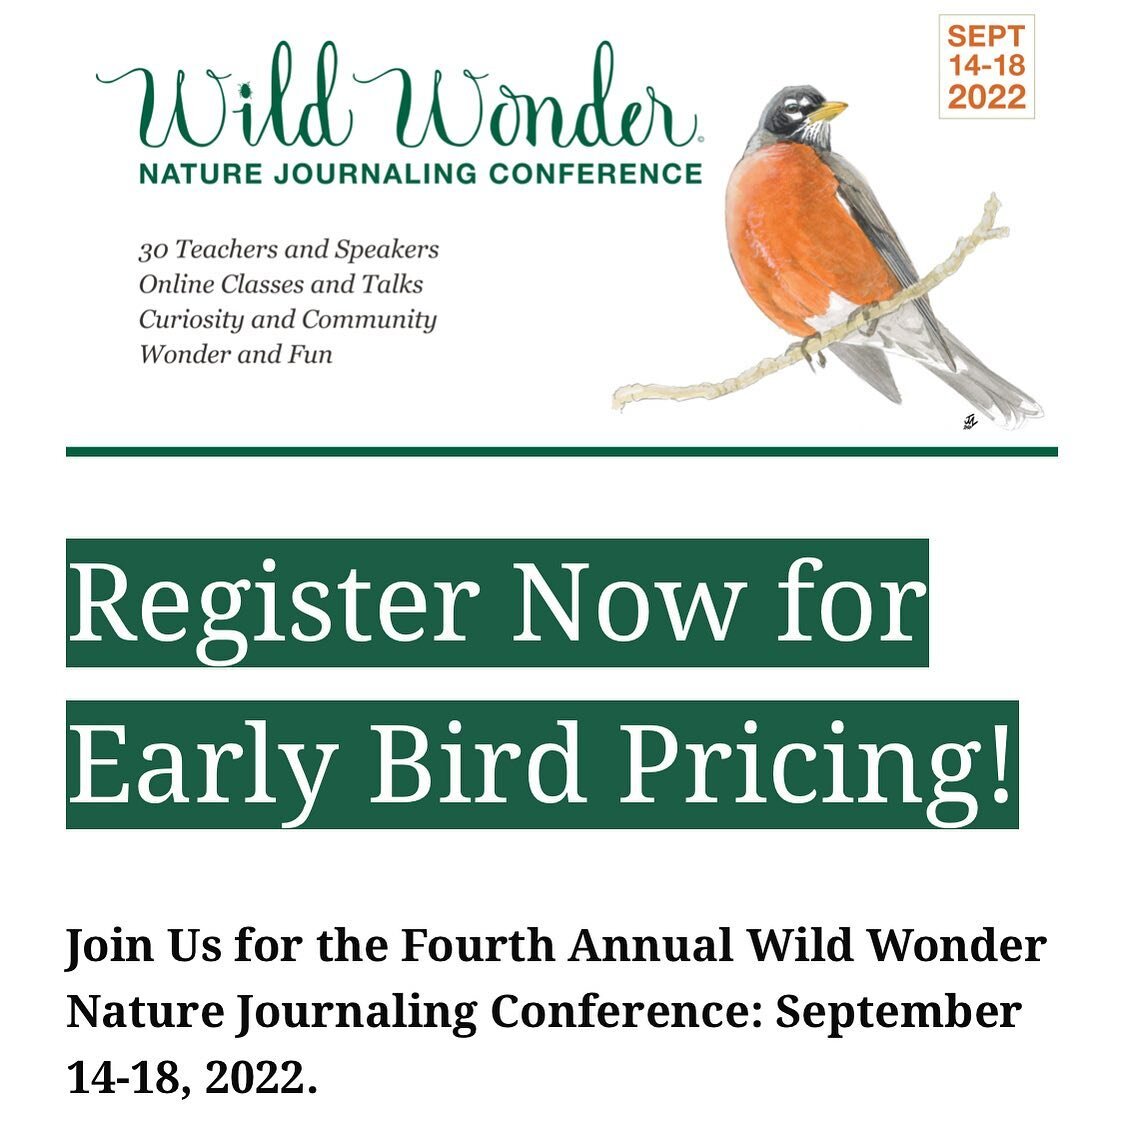 Hey! @johnmuirlaws and his Wild Wonder online event is coming in September. I&rsquo;ll be there teaching on layout for nature journalers! Early Bird pass is a great deal at $85 but it ends soon! https://johnmuirlaws.com/wildwonder/